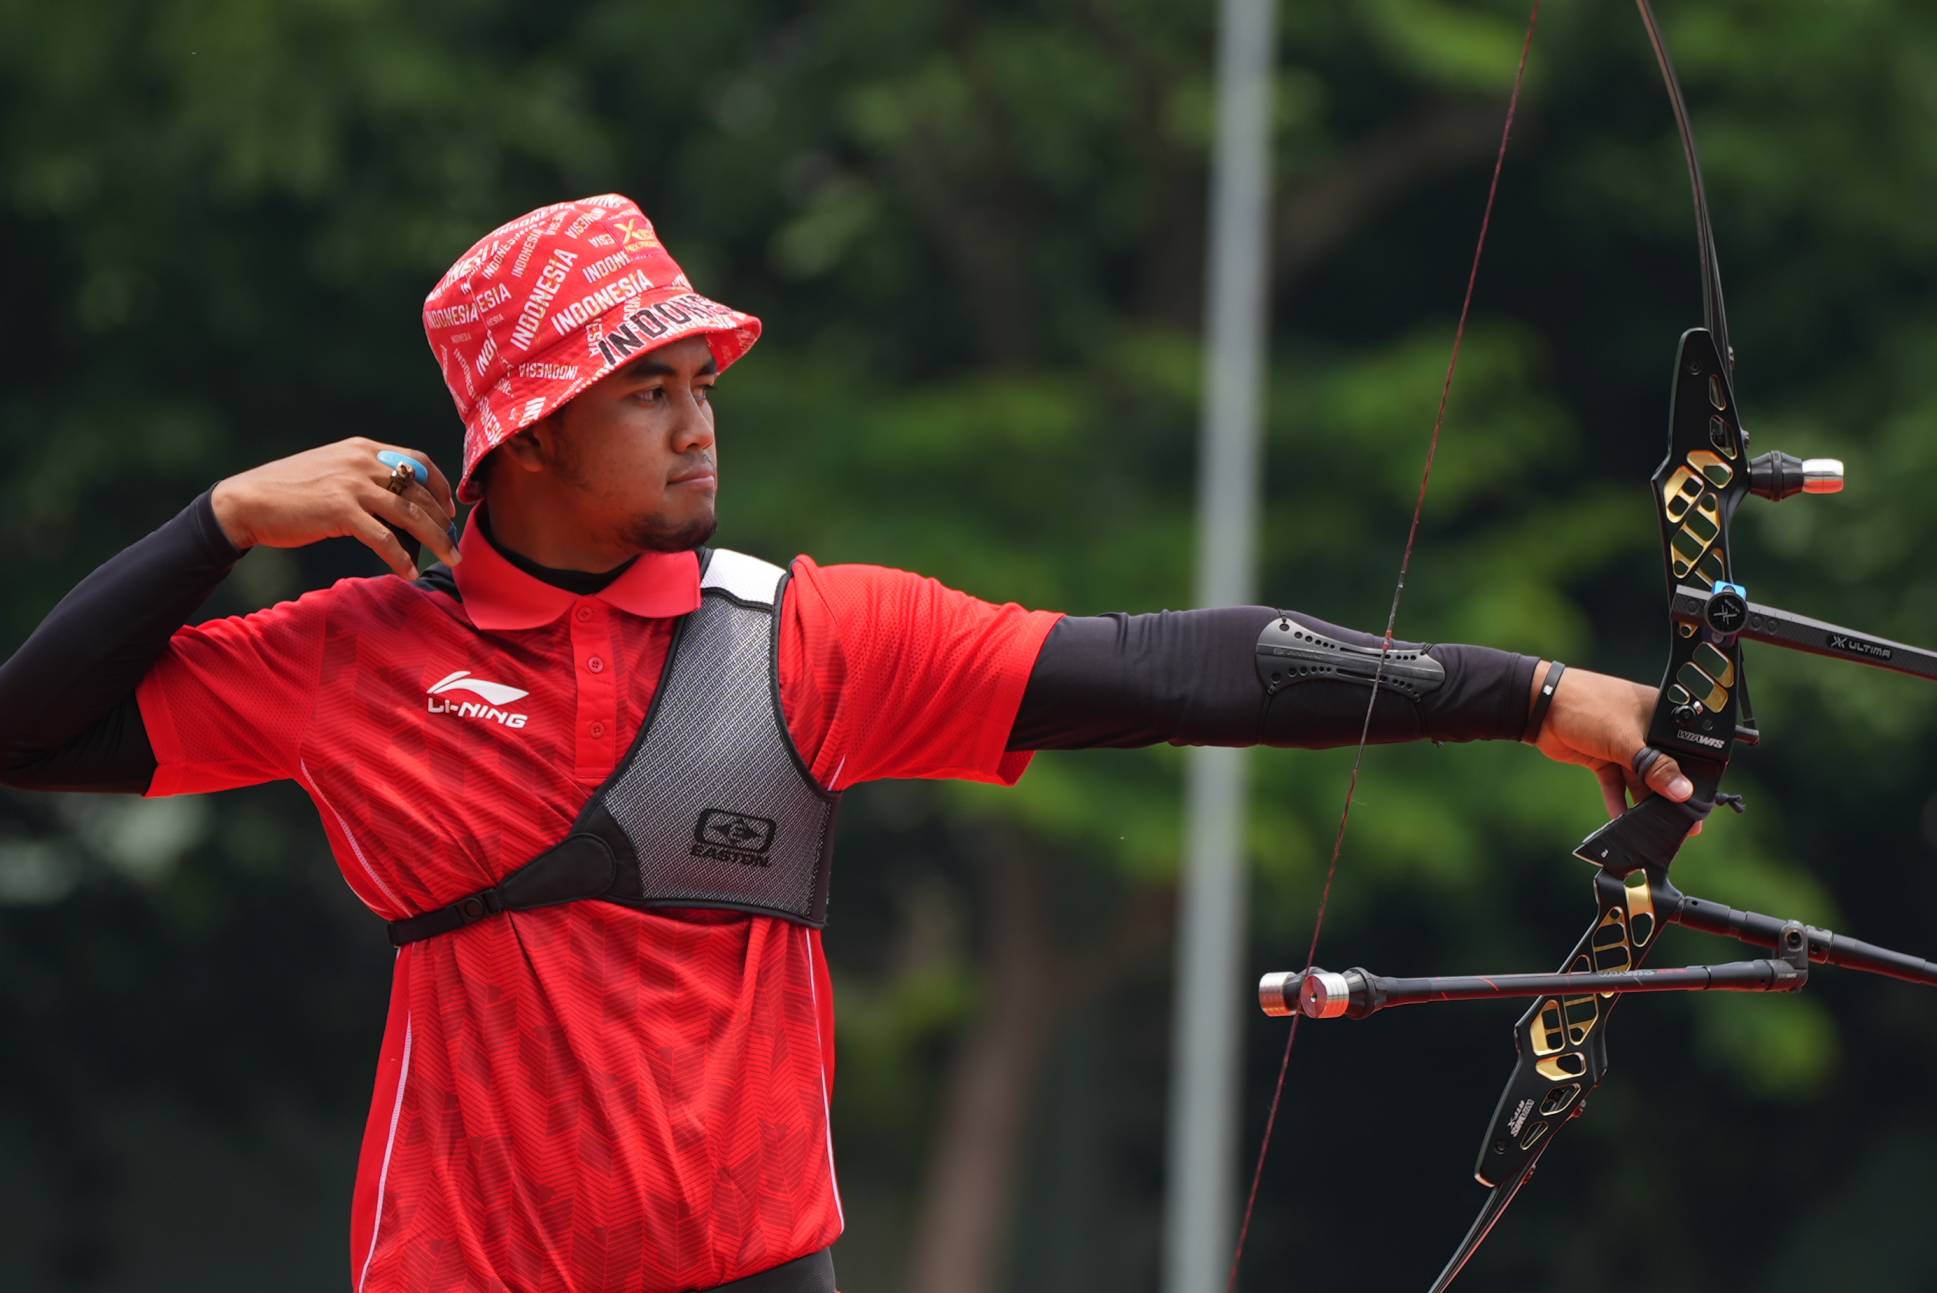 Indonesia came from behind to win the gold medal in Men's Recurve - Indonesia Olympic Commitee